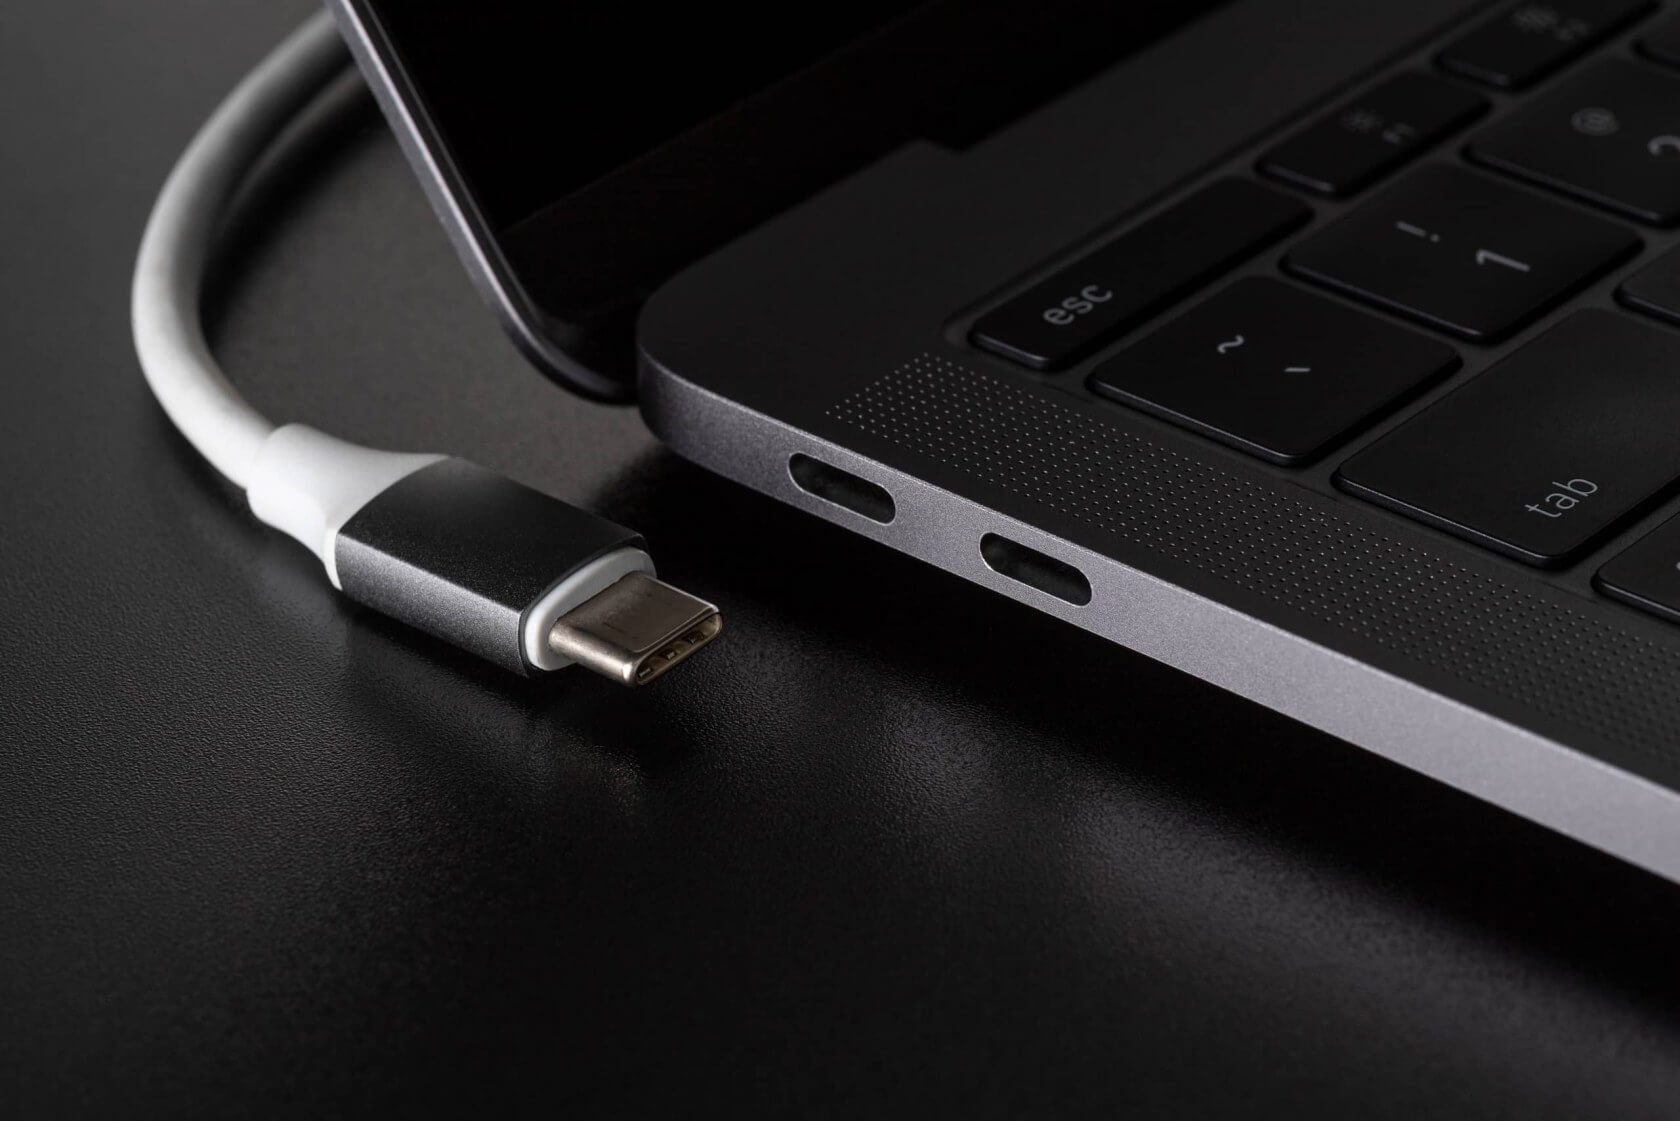 The first USB4-supported devices could arrive in late 2020